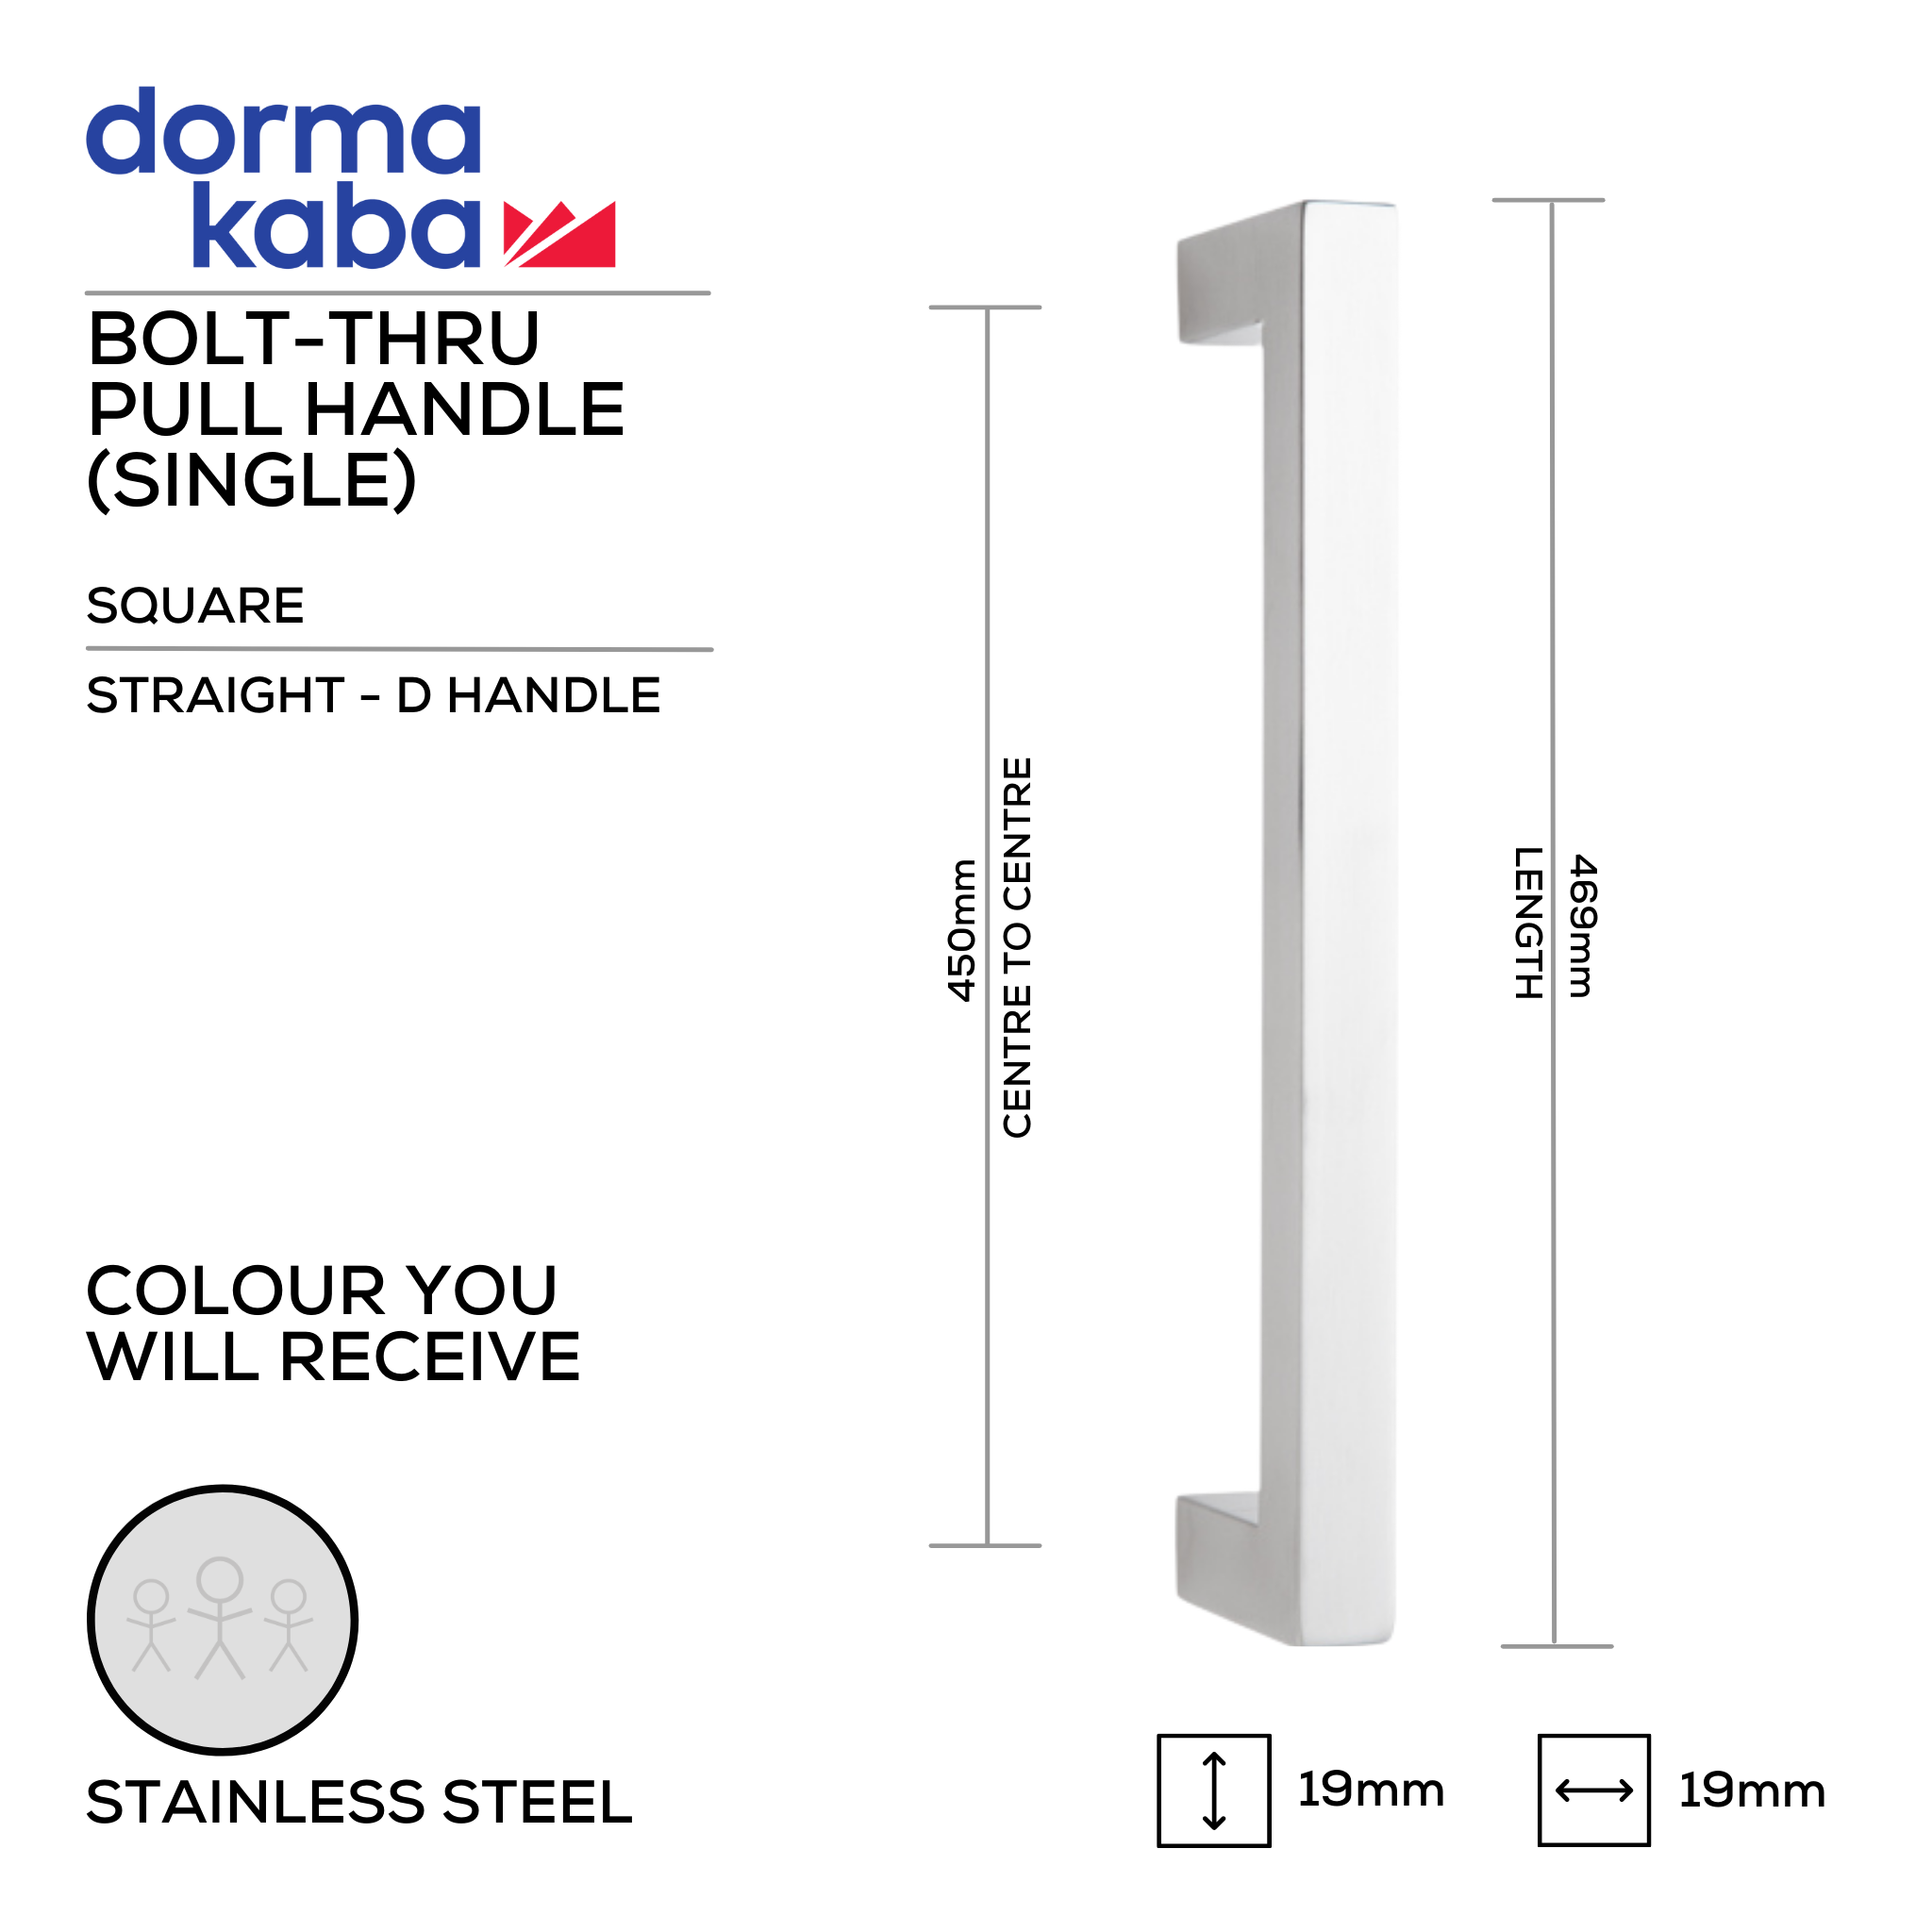 DSQ 06H 450 BT, Pull Handle, Square, Straight, D Handle, BoltThru, 19mm (d) x 469mm (l) x 450mm (ctc), Stainless Steel, DORMAKABA